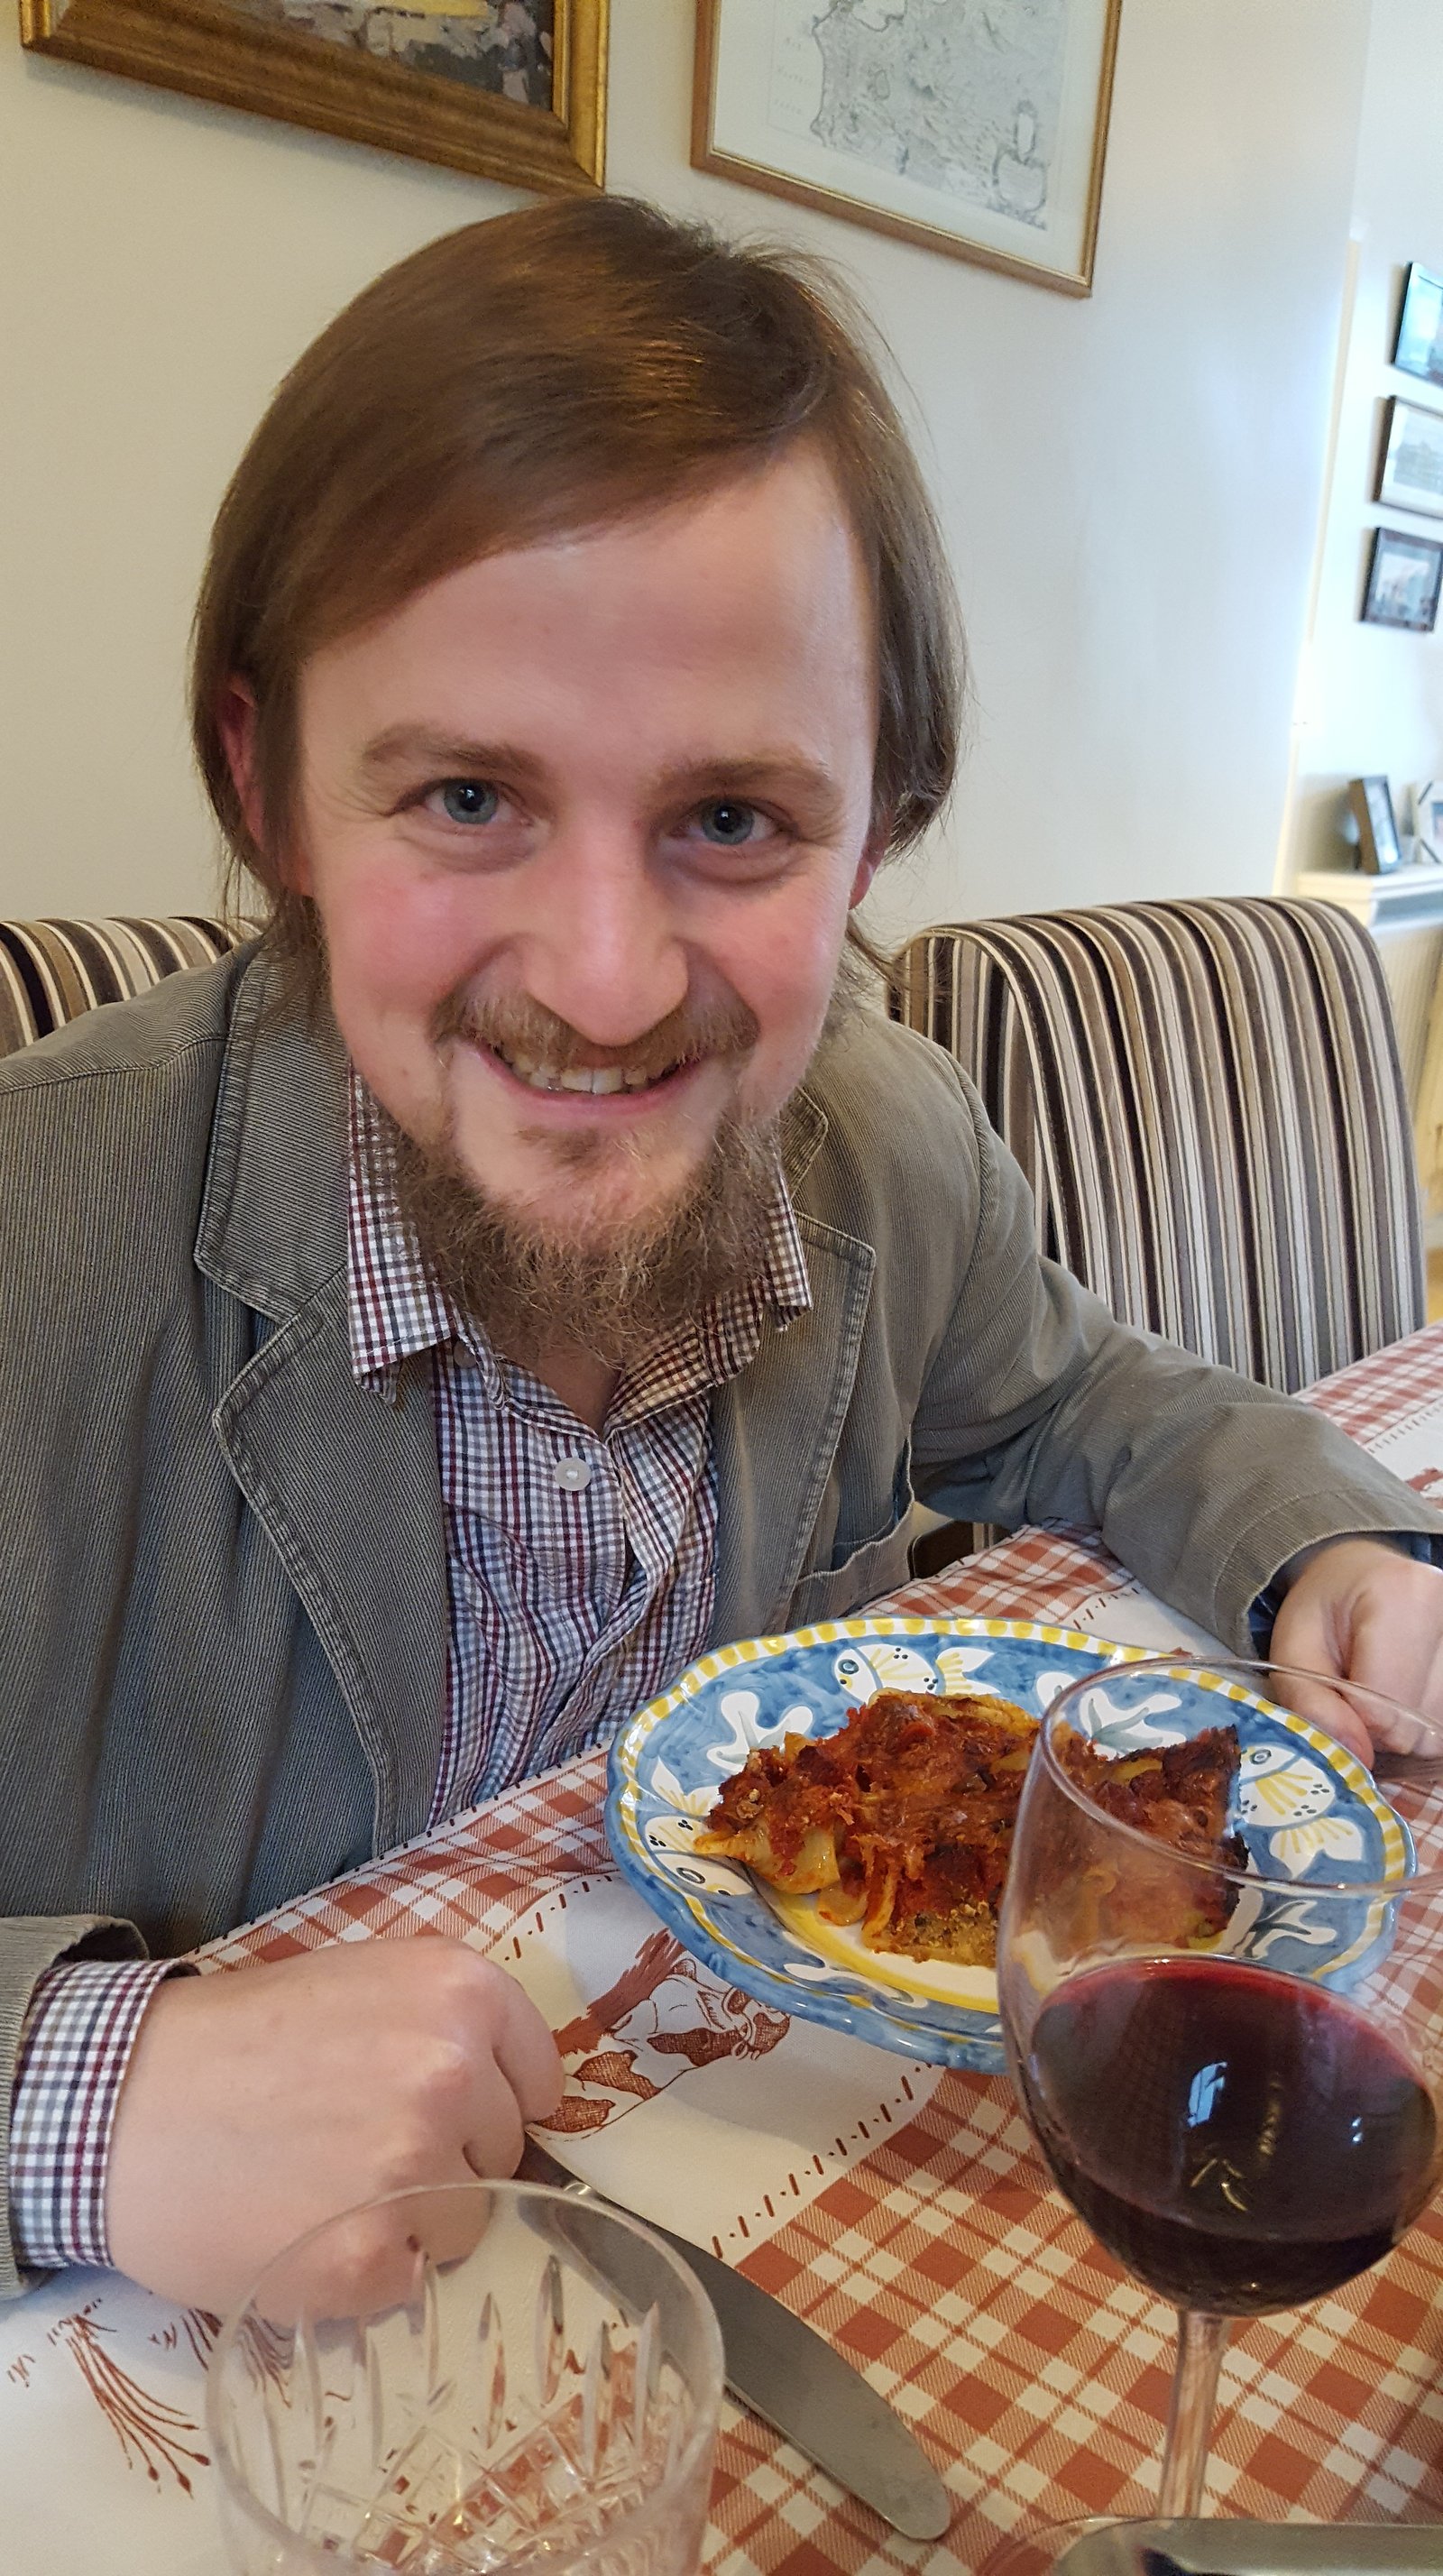 George (with long hair) eating a pasta dish